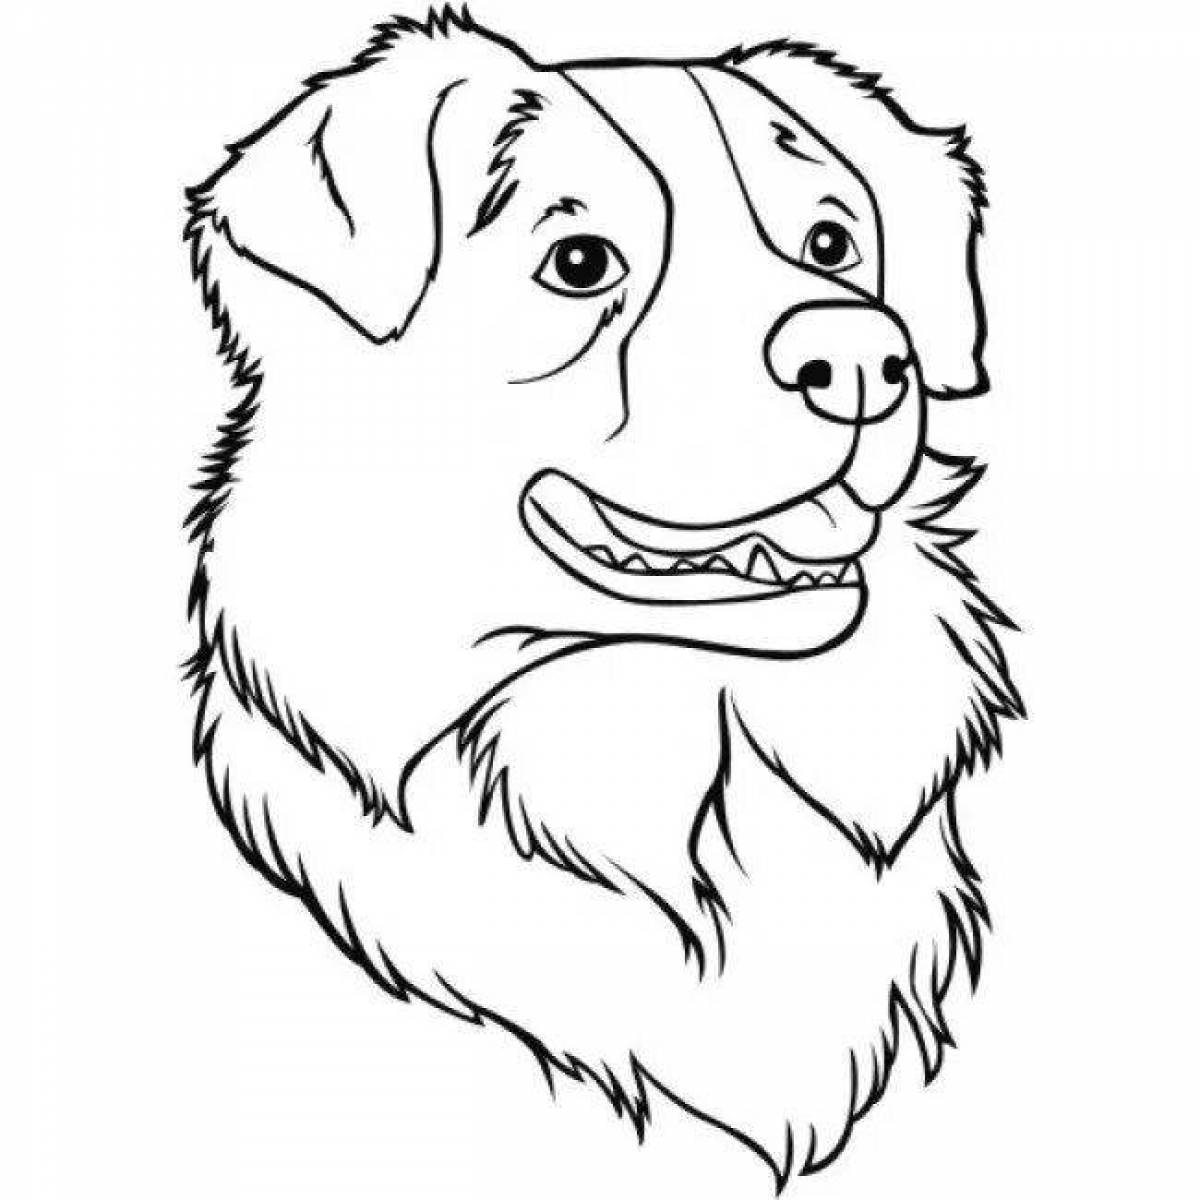 Coloring book shining muzzle of a dog